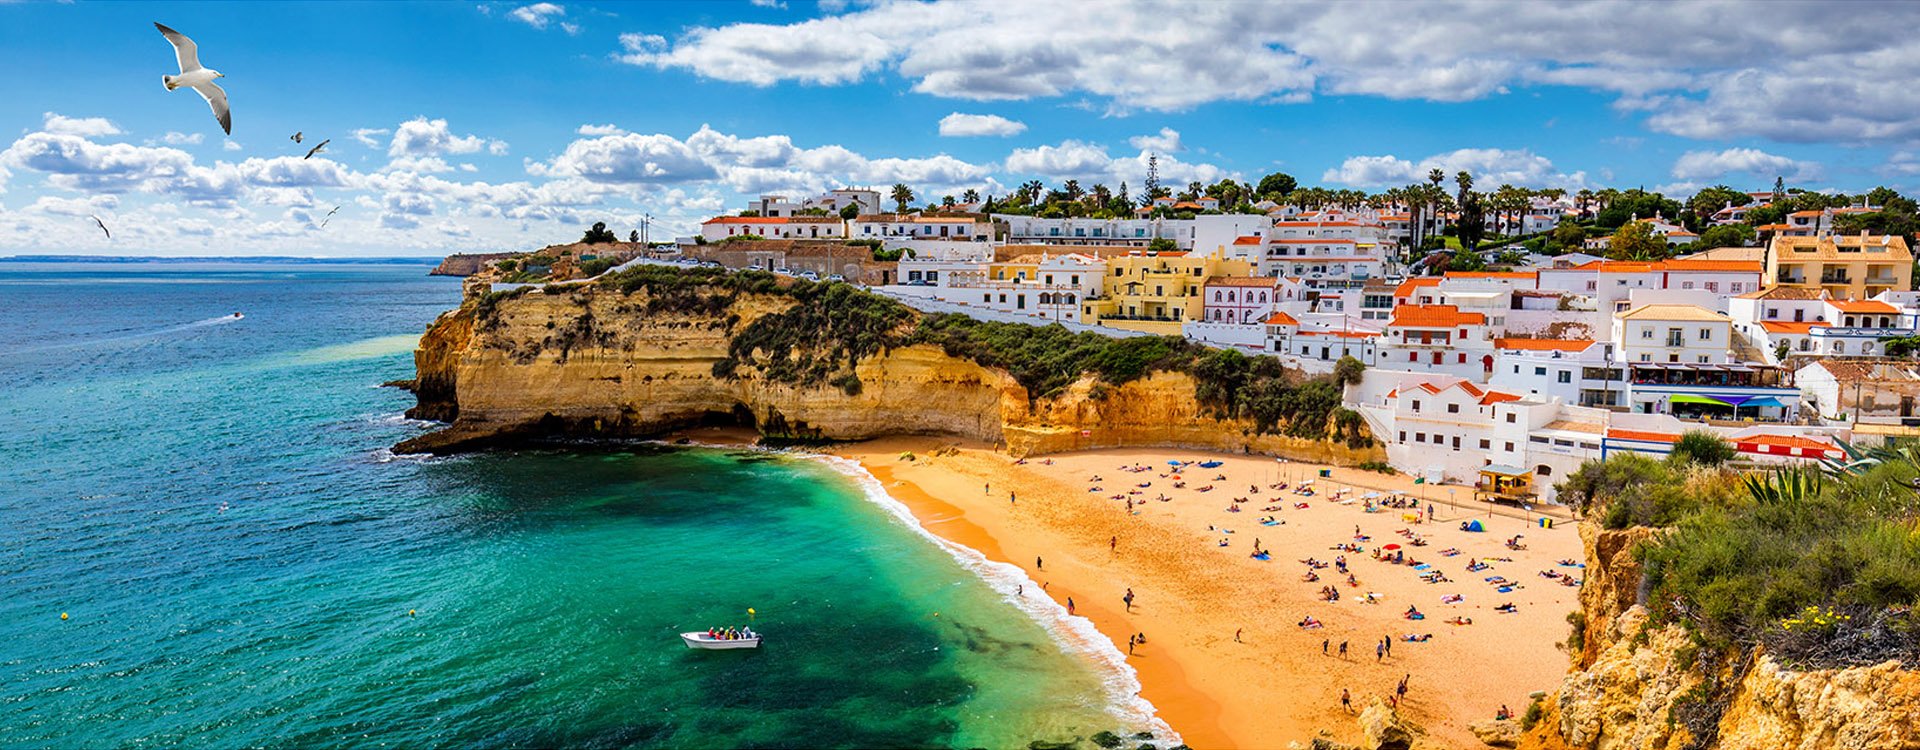 View of Carvoeiro fishing village with beautiful beach, Algarve, Portugal. View of beach in Carvoeiro town with colorful houses on coast of Portugal. The village Carvoeiro in the Algarve Portugal